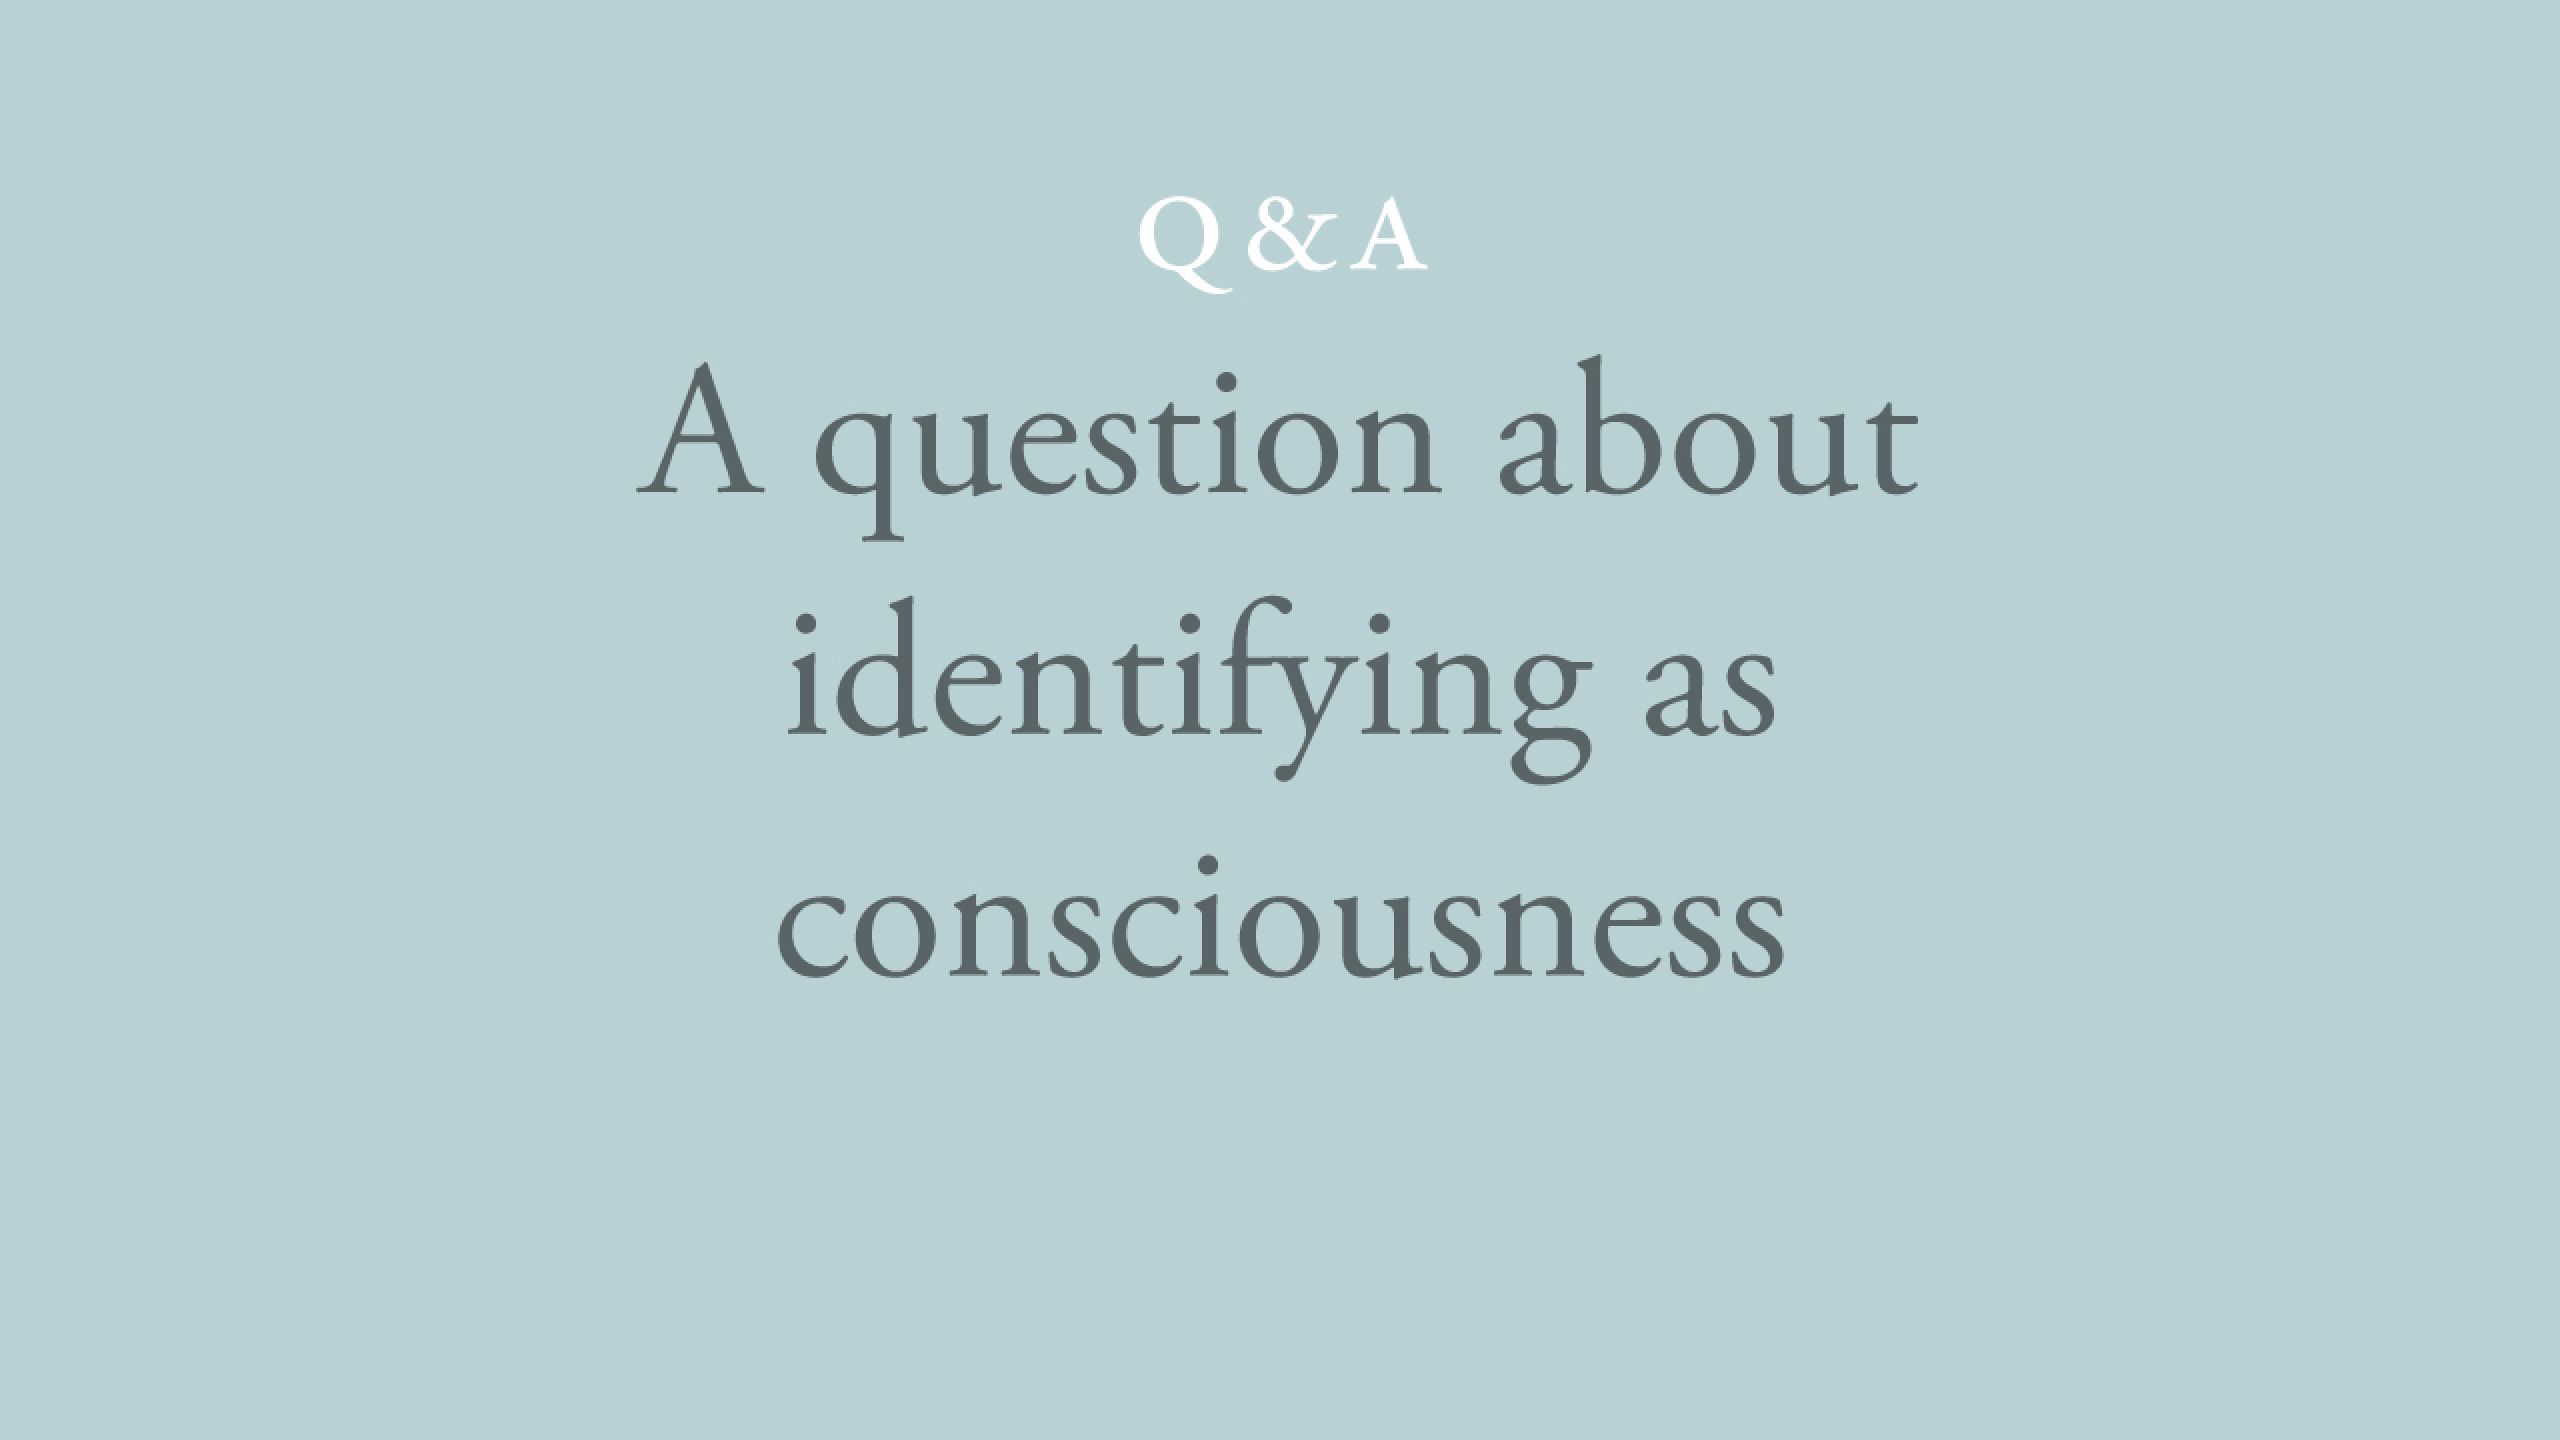 How can I identify as consciousness all the time?